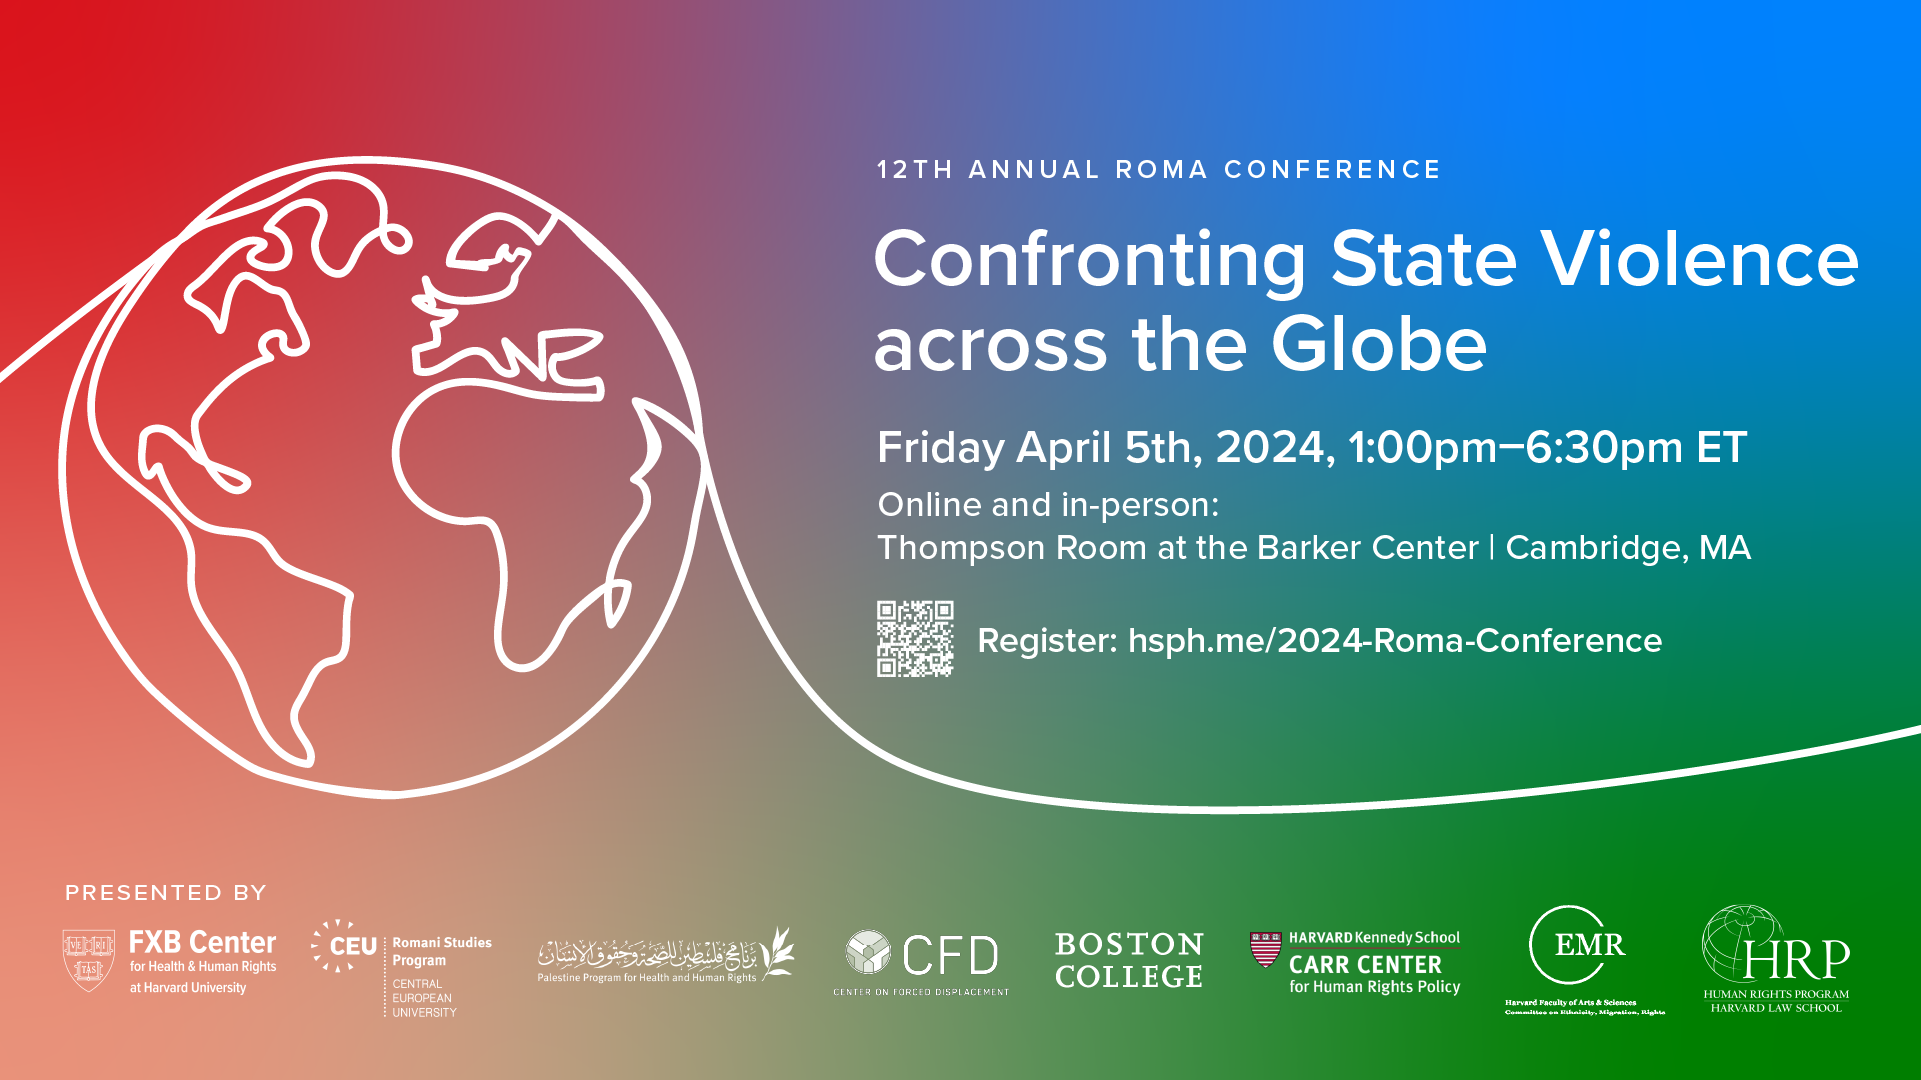 Flier with red-blue-green background, white line sketch of globe along curved line. 12th Annual Roma Conference Confronting State Violence across the Globe Friday April 5th, 2024, 1:00pm-6:30pm ET Online and in-person: Thompson Room at the Barker Center | Cambridge, MA Register: hsph.me/2024-Roma-Conference Presented by: The FXB Center for Health and Human Rights at Harvard University, Romani Studies Program at Central European University, the Palestine Program for Health and Human Rights, the Center on Forced Displacement at Boston University, the Center for Human Rights and International Justice, History and Music Departments at the Morrissey College of Arts and Sciences at Boston College, the Carr Center for Human Rights Policy at the Harvard Kennedy School, the Harvard University Committee on Ethnicity, Migration, Rights (EMR), and the Human Rights Program at Harvard Law School.